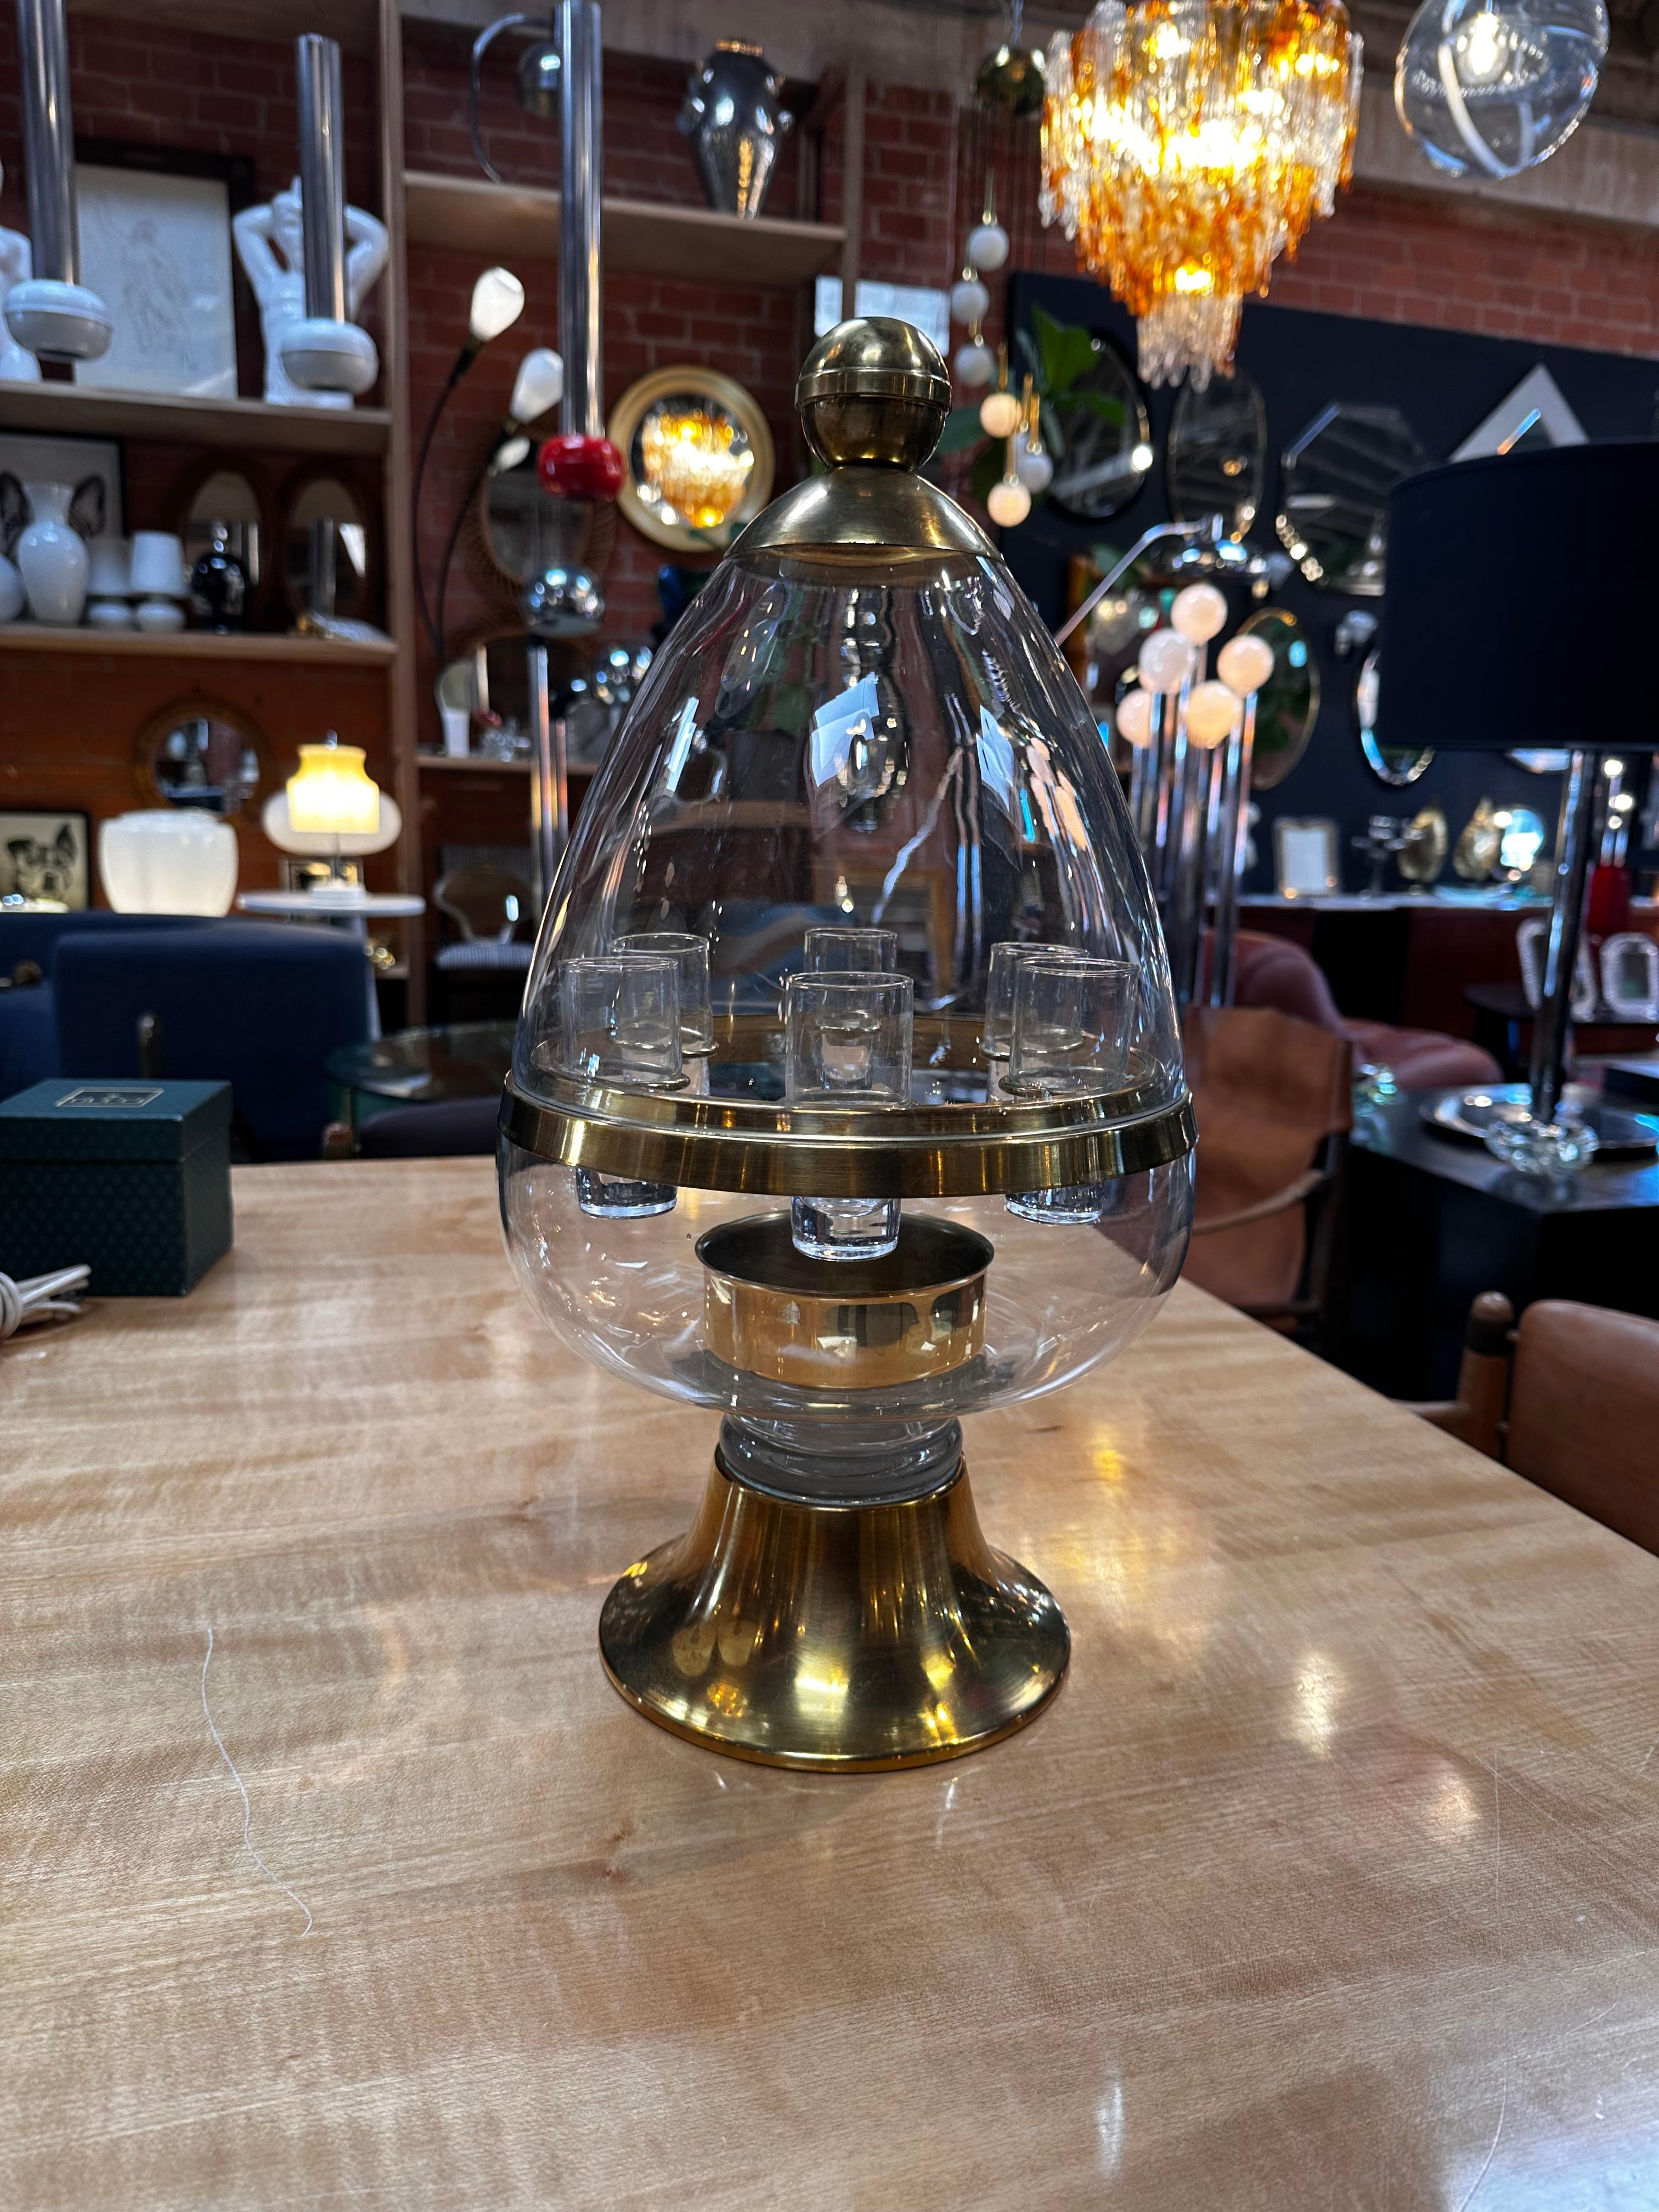 The Vintage Italian Egg Decanter Liquor Shot Glass Case from the 1960s is a multifunctional and stylish barware accessory. Crafted with a brass base and a glass top, it features a unique egg-shaped design that adds a touch of retro charm. This